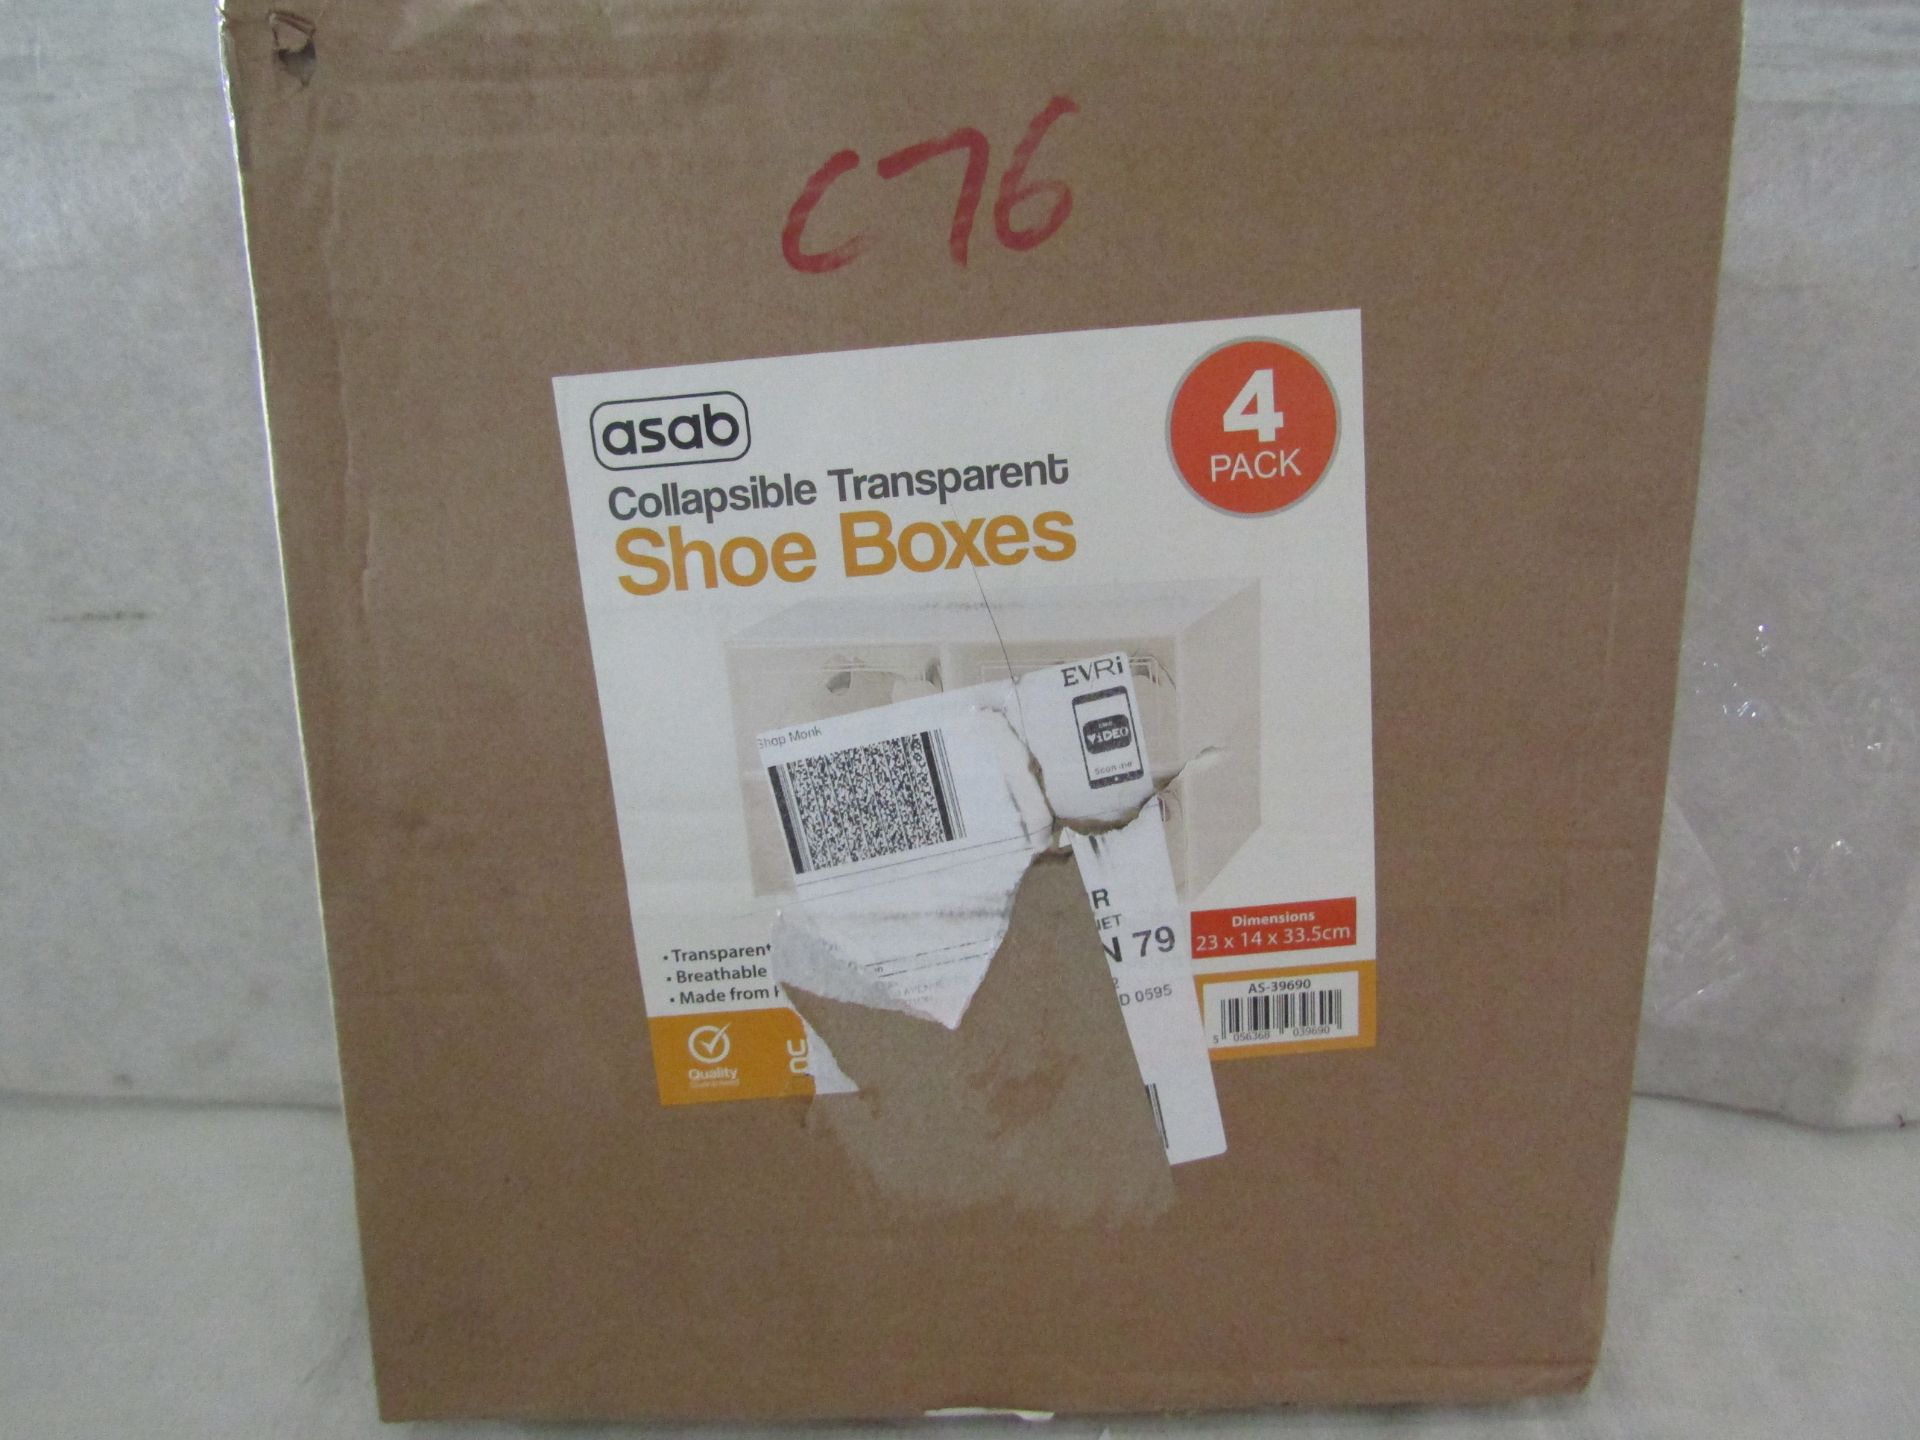 5X Sets of 4 Collapsible Transparent Shoe Boxes - Unchecked & Boxed.